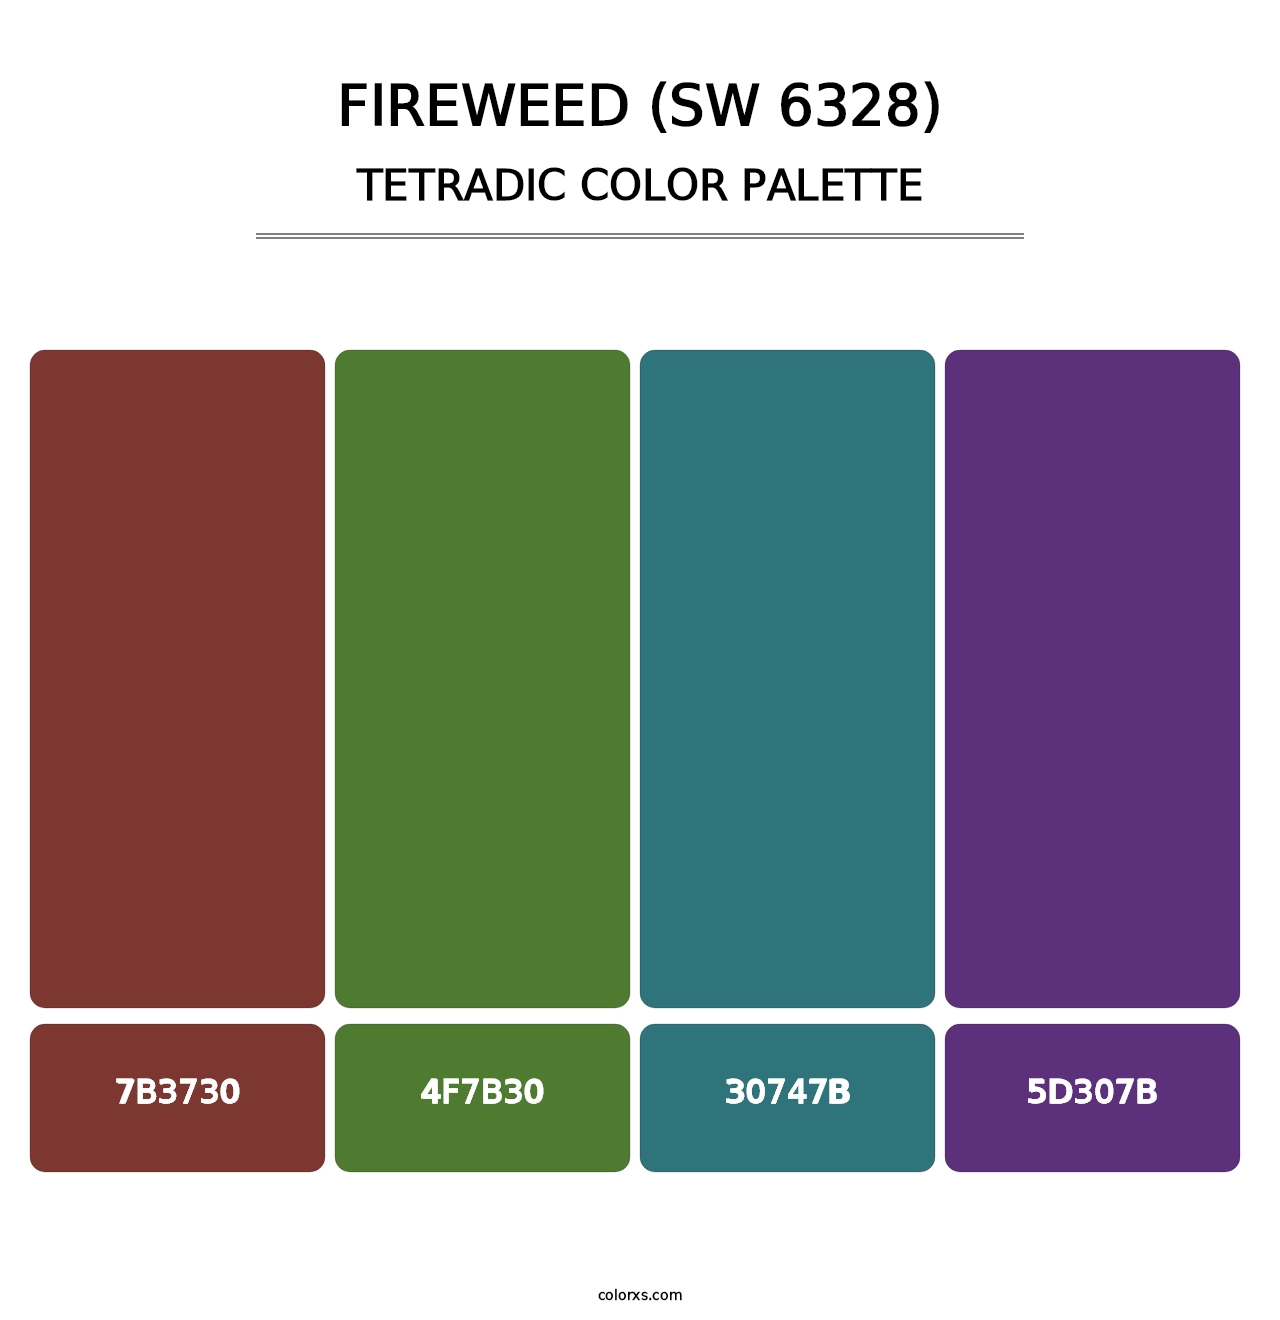 Fireweed (SW 6328) - Tetradic Color Palette